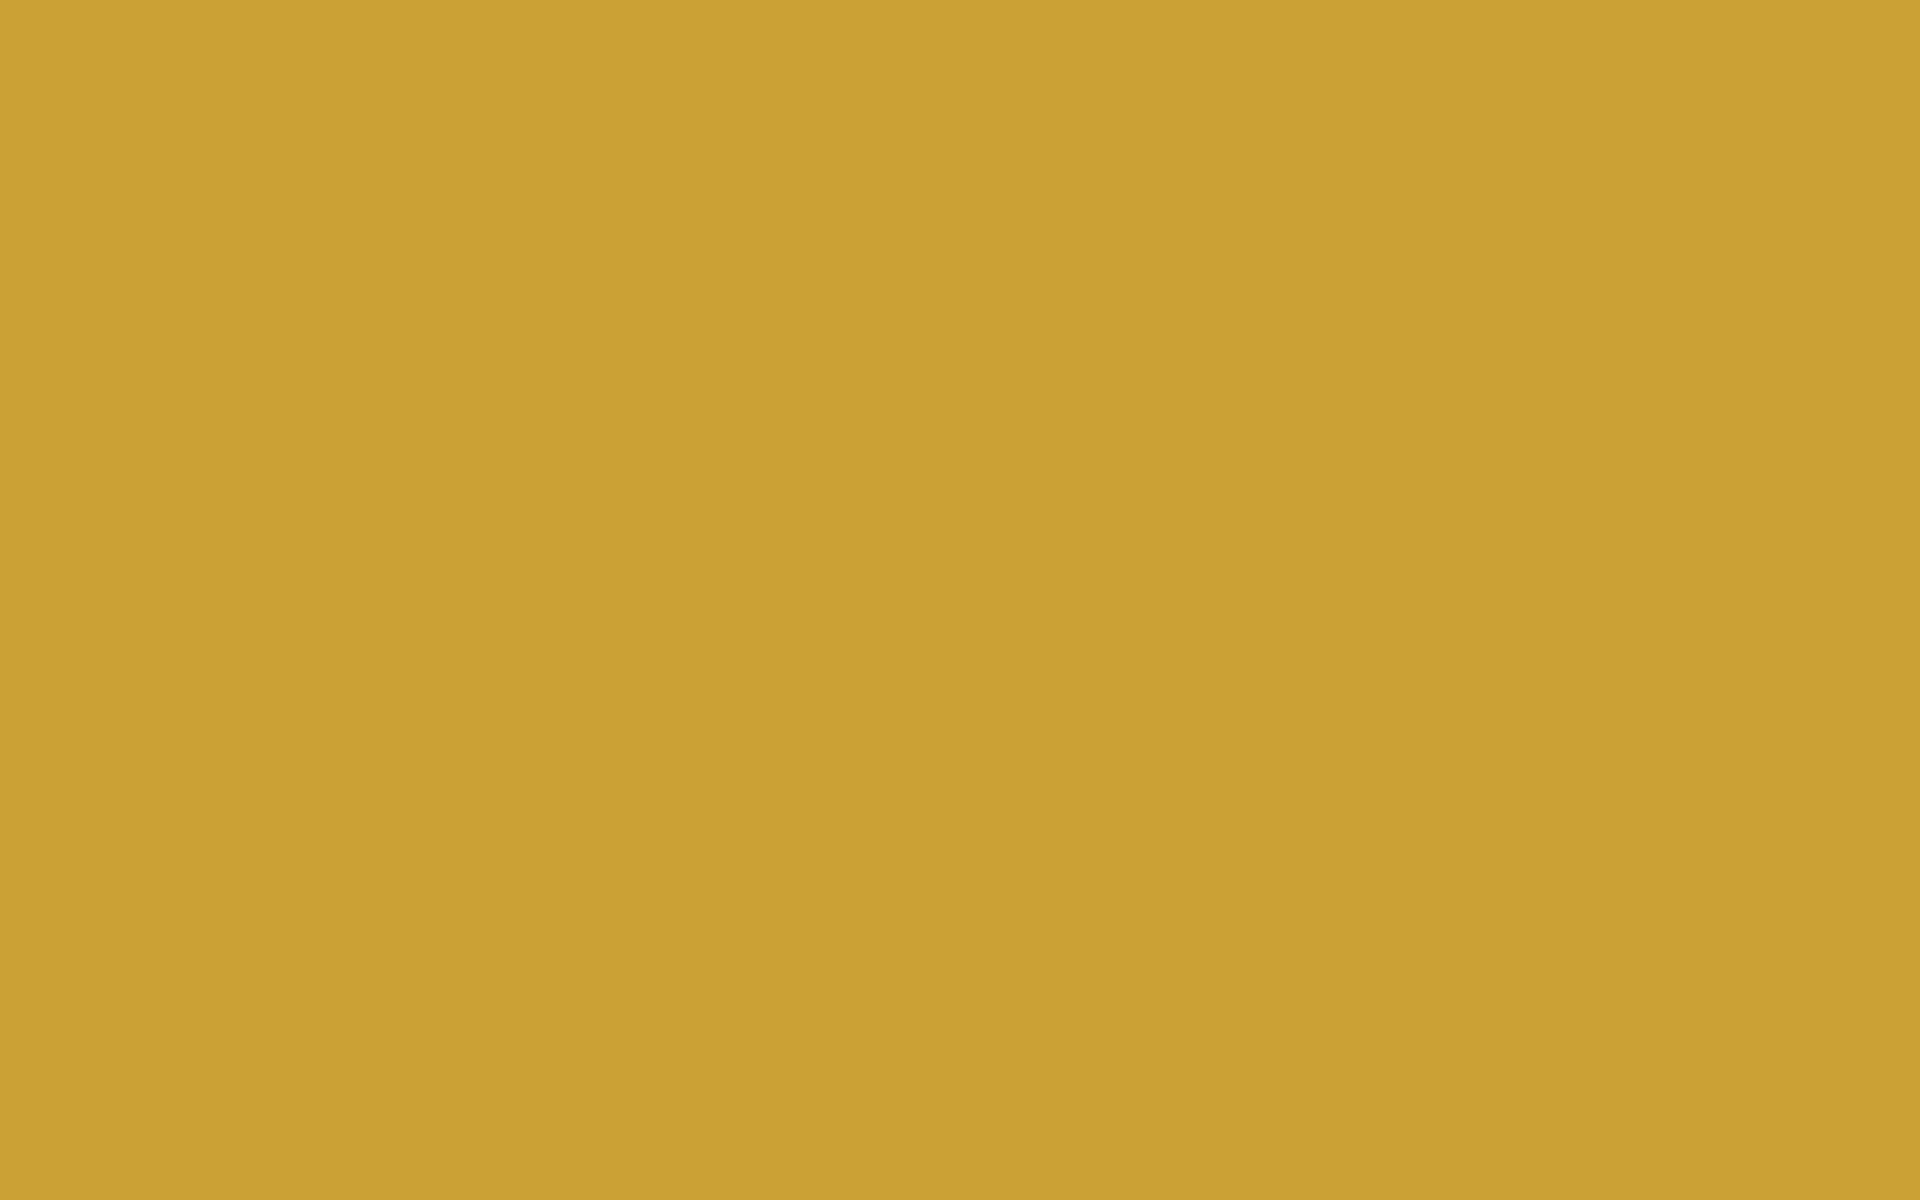 1920x1200 Satin Sheen Gold Solid Color Background